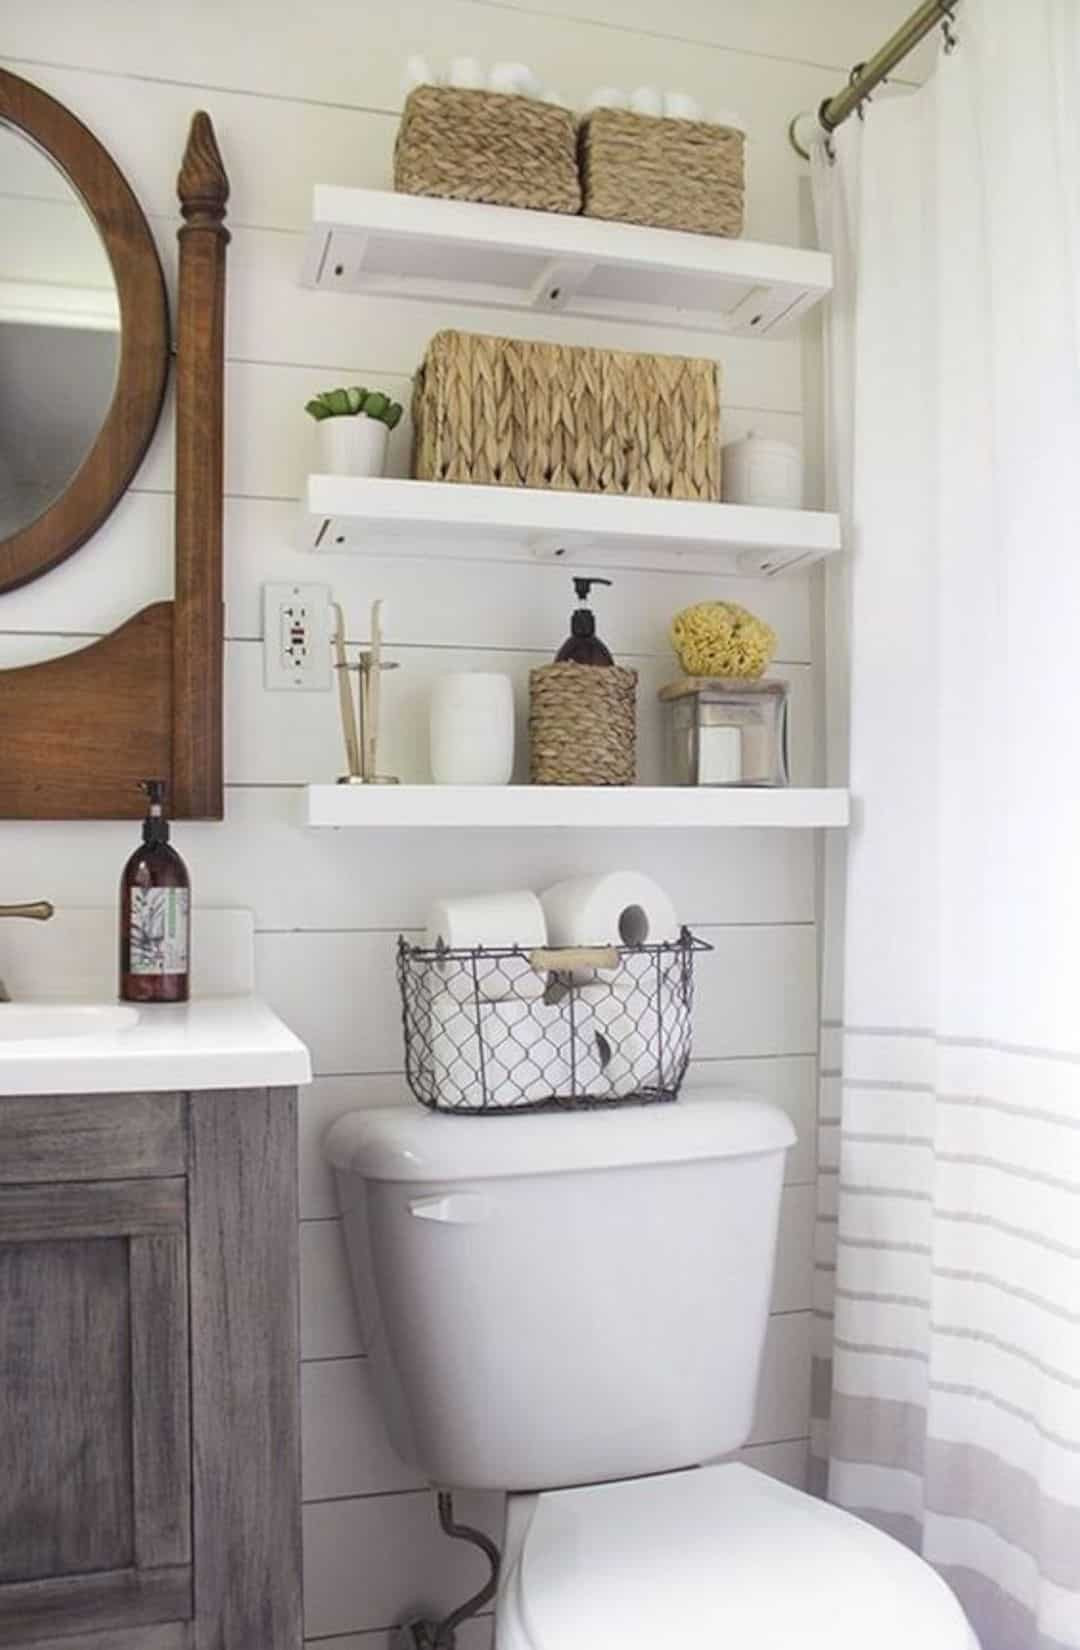 Images Of Bathroom Decor
 17 Awesome Small Bathroom Decorating Ideas